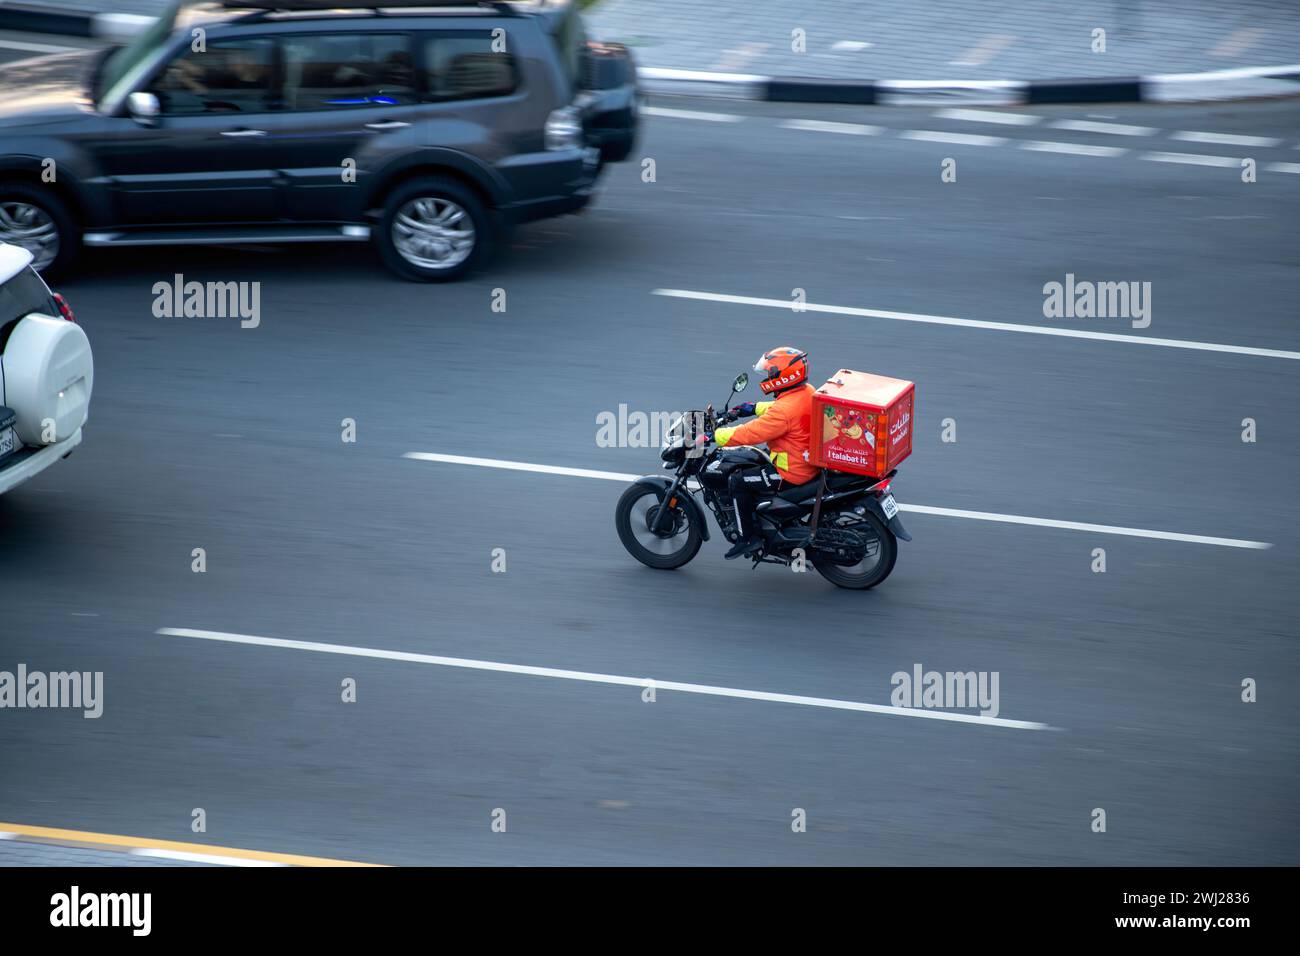 Delivery boy Talabat food Delivery rider on road Stock Photo